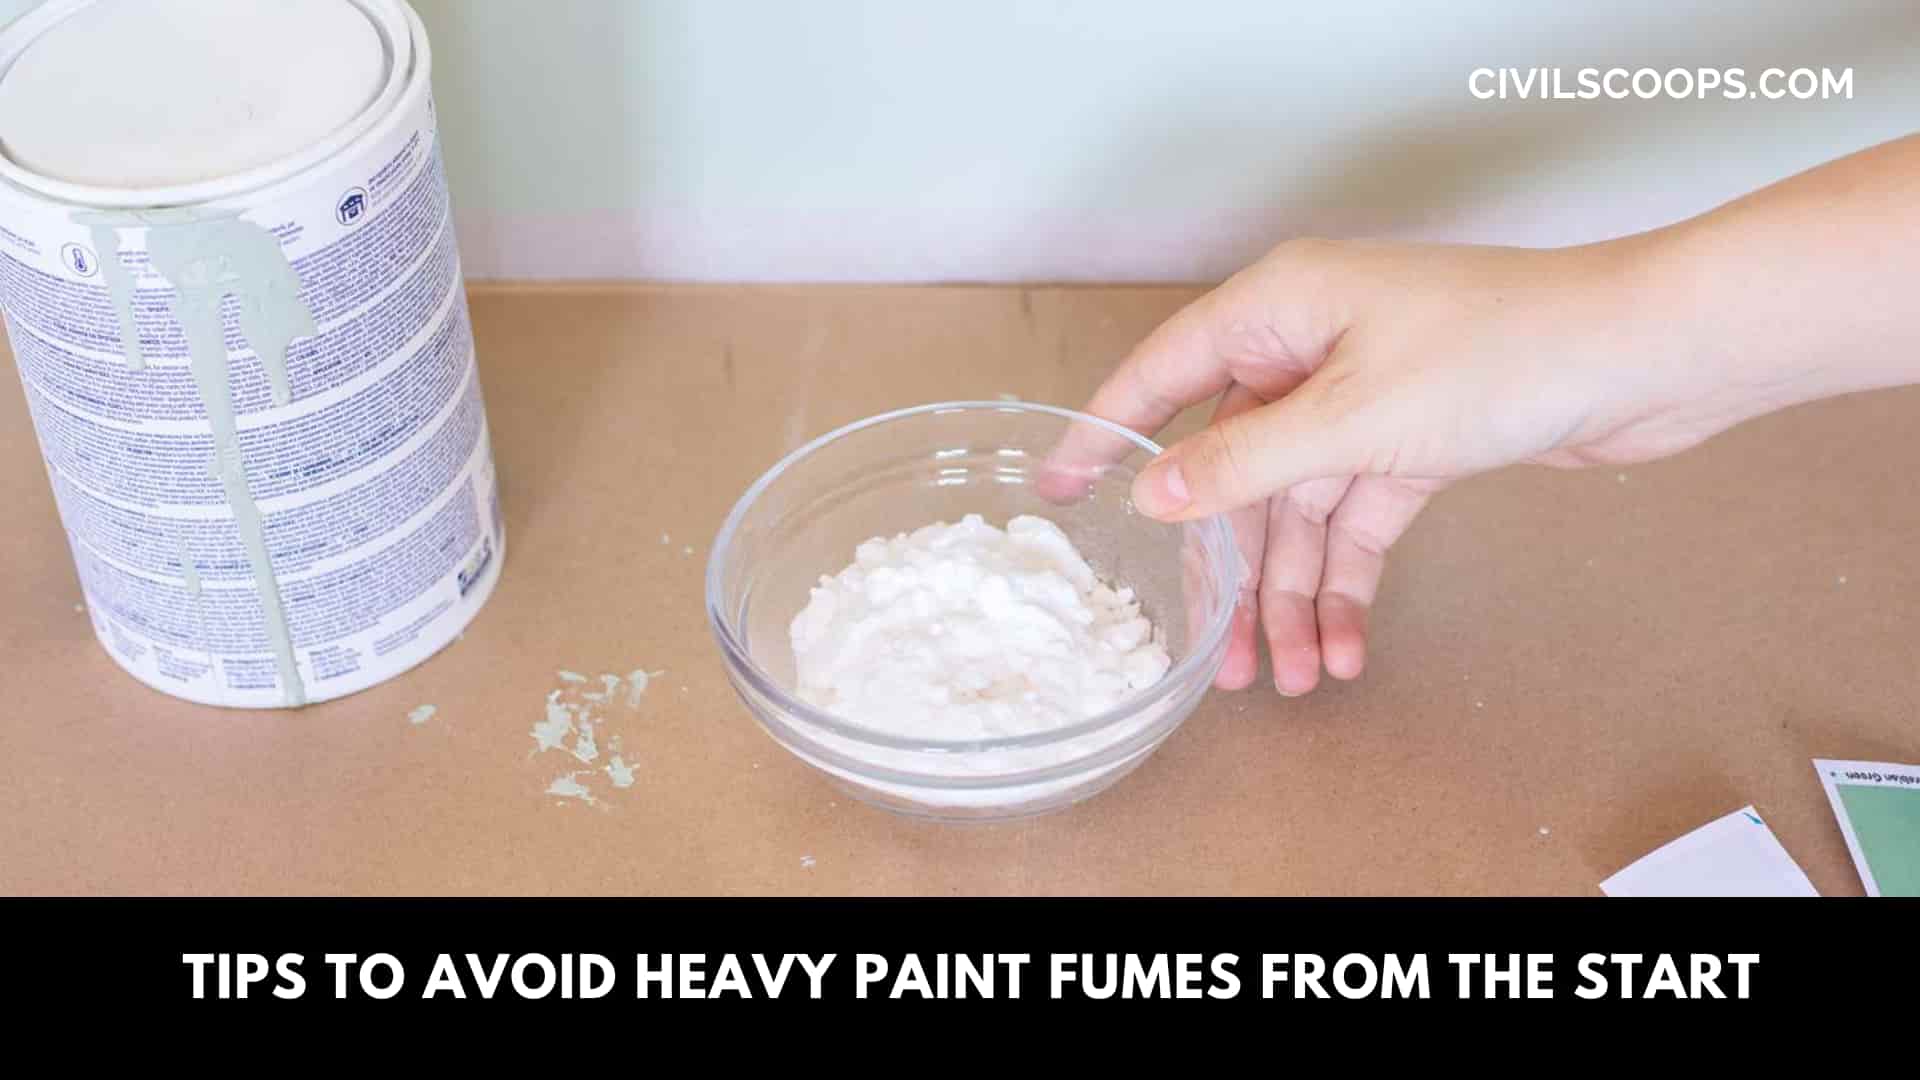 Tips to Avoid Heavy Paint Fumes from the Start